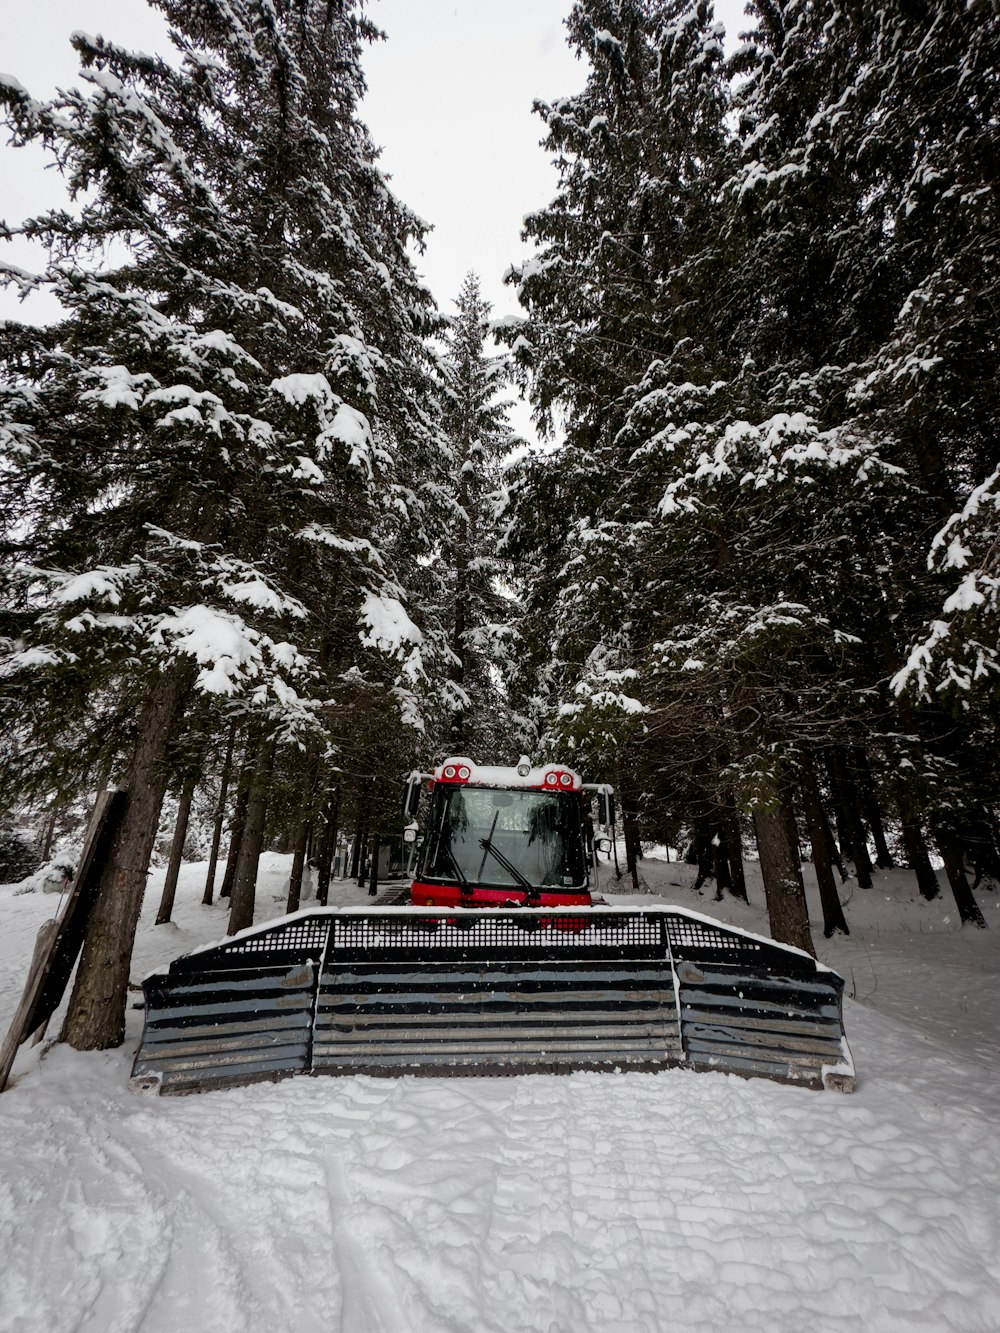 a snow plow in the middle of a snowy forest